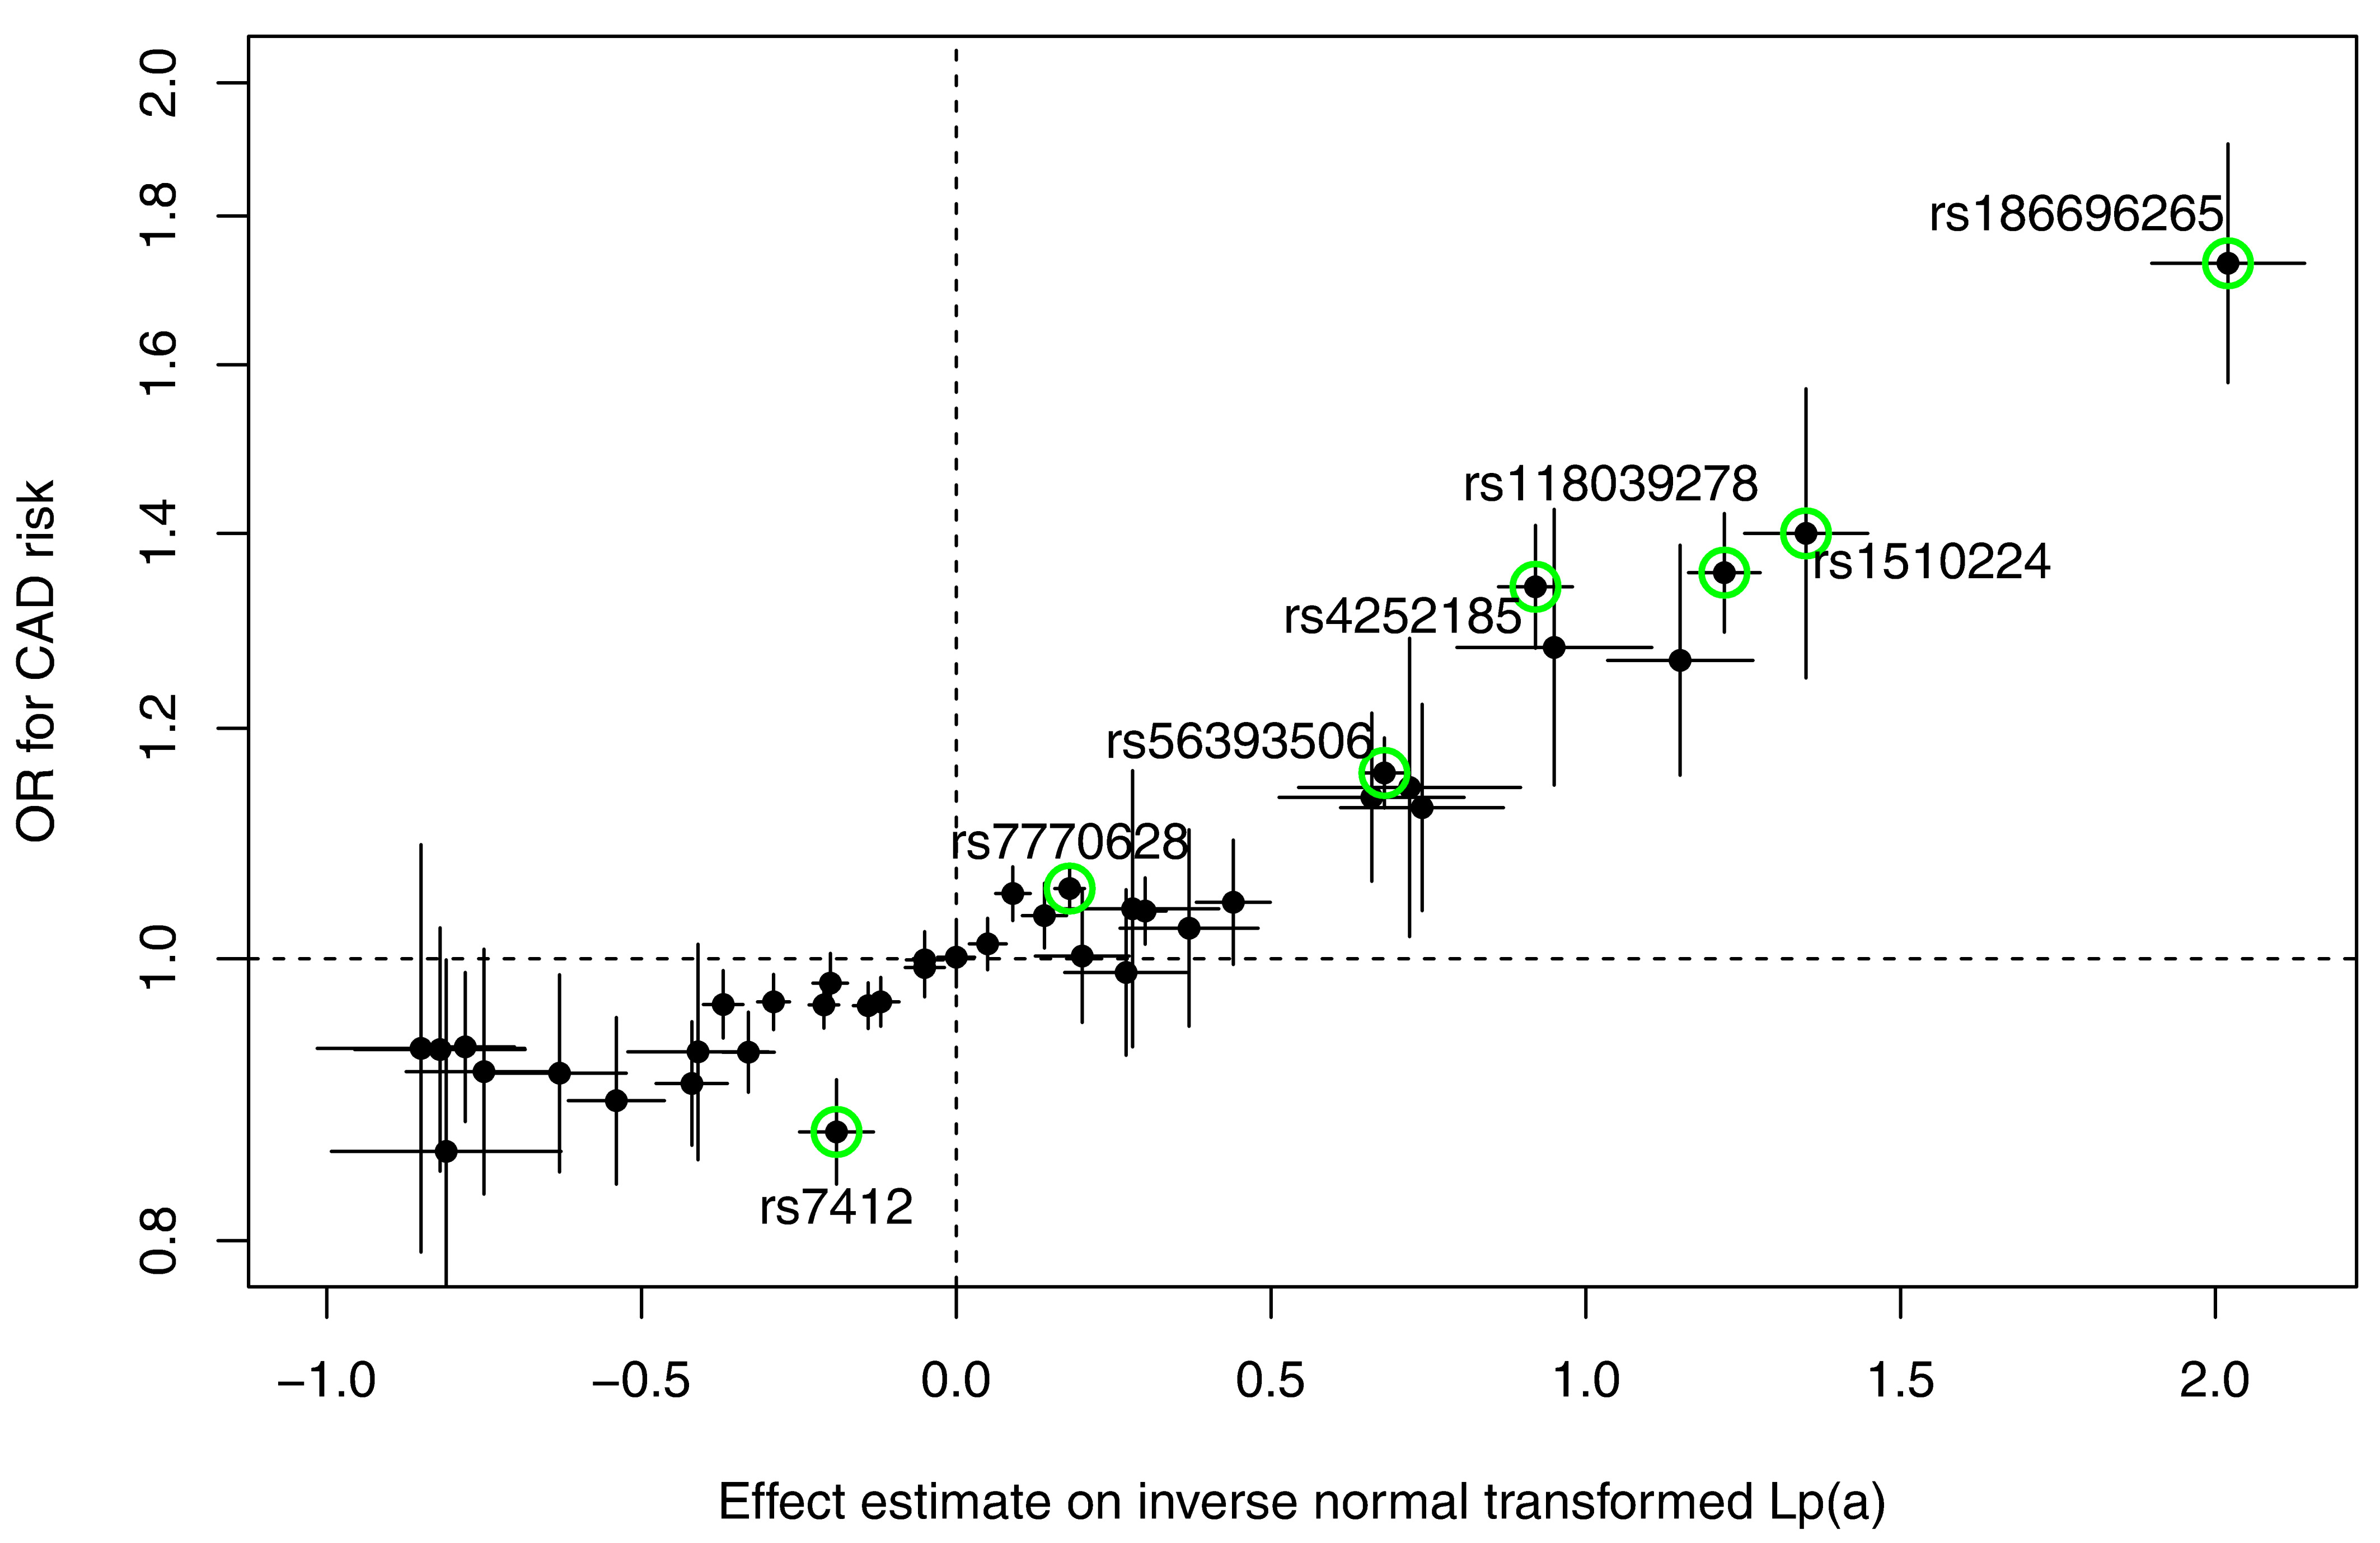 Figure 1: Scatterplot showing the effect estimates on inverse normally transformed Lp(a) levels (±95% CI) on the x axis and the ORs for CAD risk (±95% CI) on the y axis (derived from theCARDIoGRAMplusC4D consortium) for all 40 SNPs, which were identified in our GWAS and which were available in the CARDIoGRAMplusC4D results. All SNPs, which are also genome-wide significantly associated with CAD risk, are marked in green. (Mack et al., J. Lipid Res. 2017).